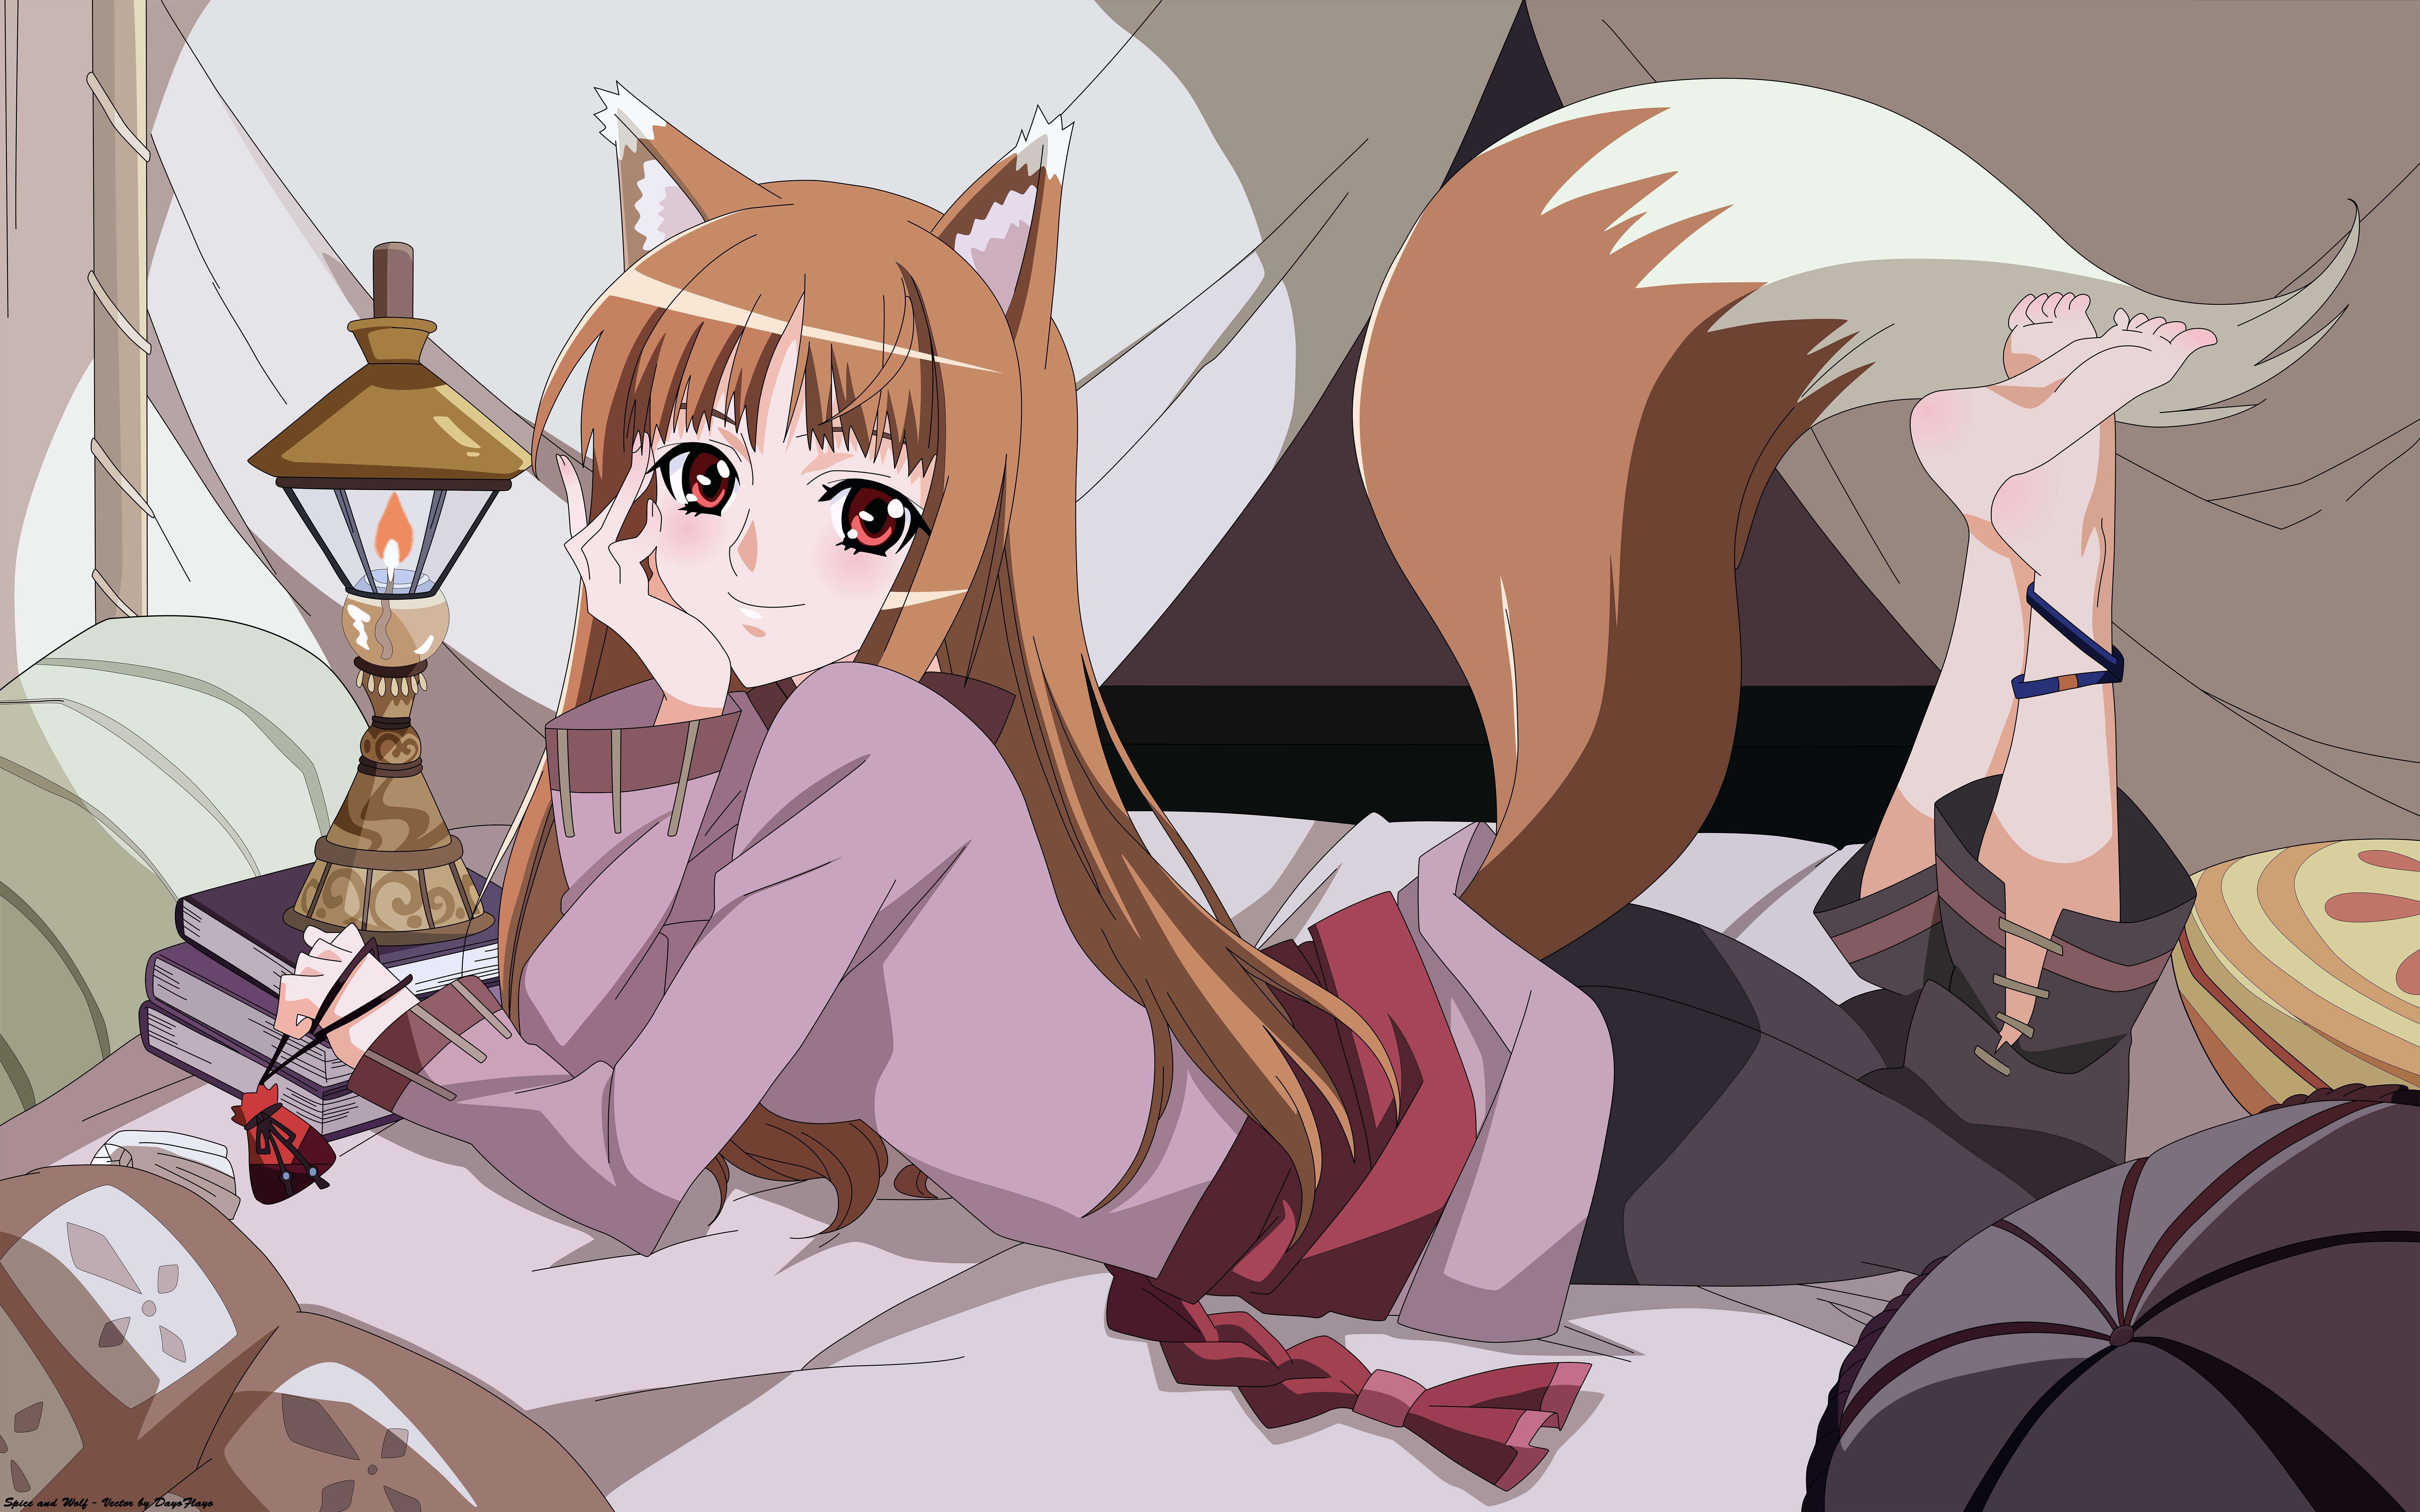 Anime 7997x4997 anime anime girls Holo (Spice and Wolf) Spice and Wolf wolf girls lying on front tail animal ears books barefoot smiling brunette fantasy art fantasy girl red eyes looking at viewer